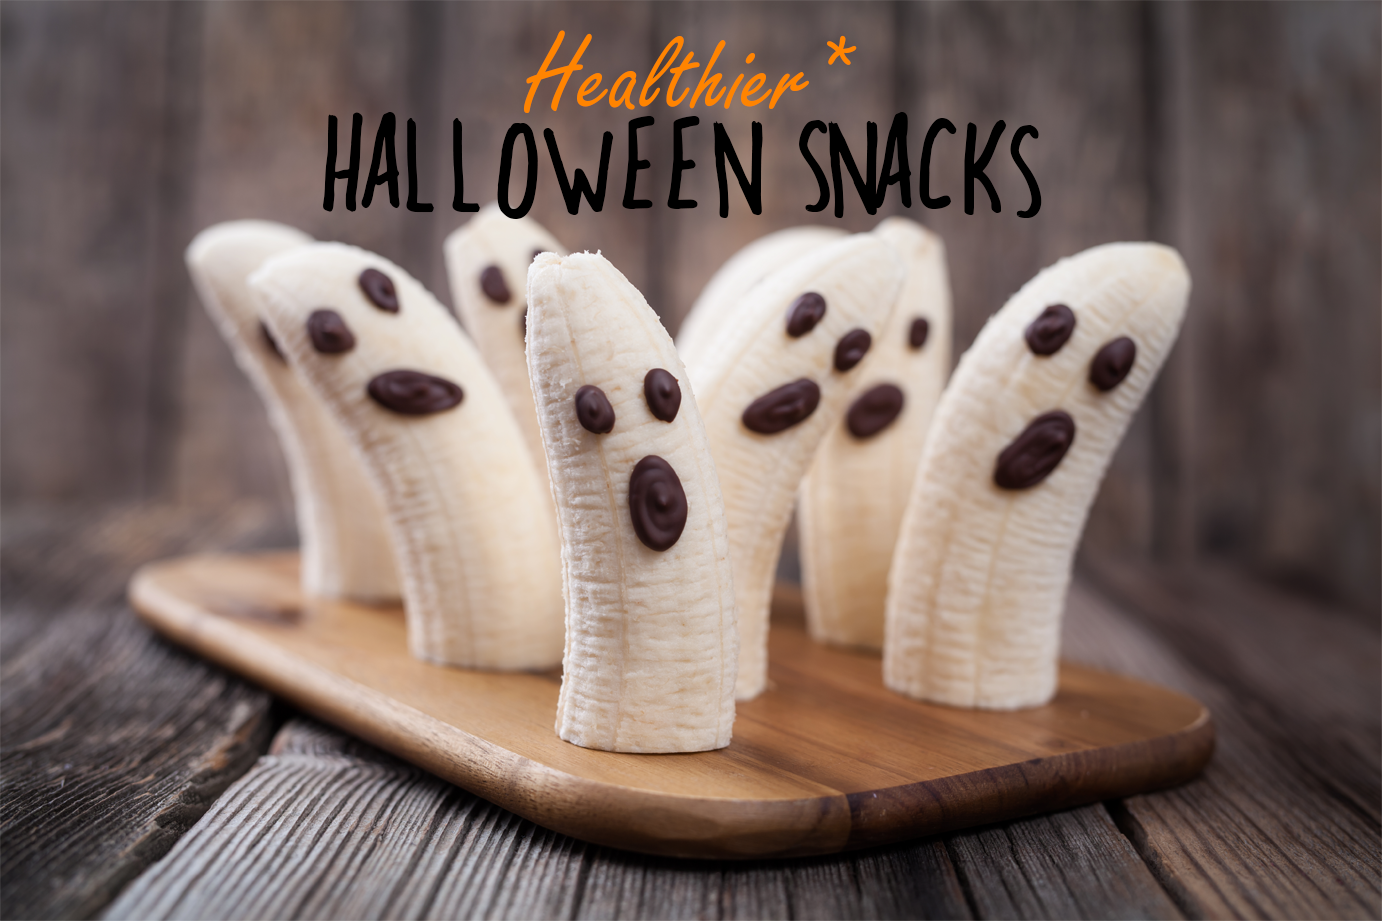 Some Healthier* Halloween Party Snack Options